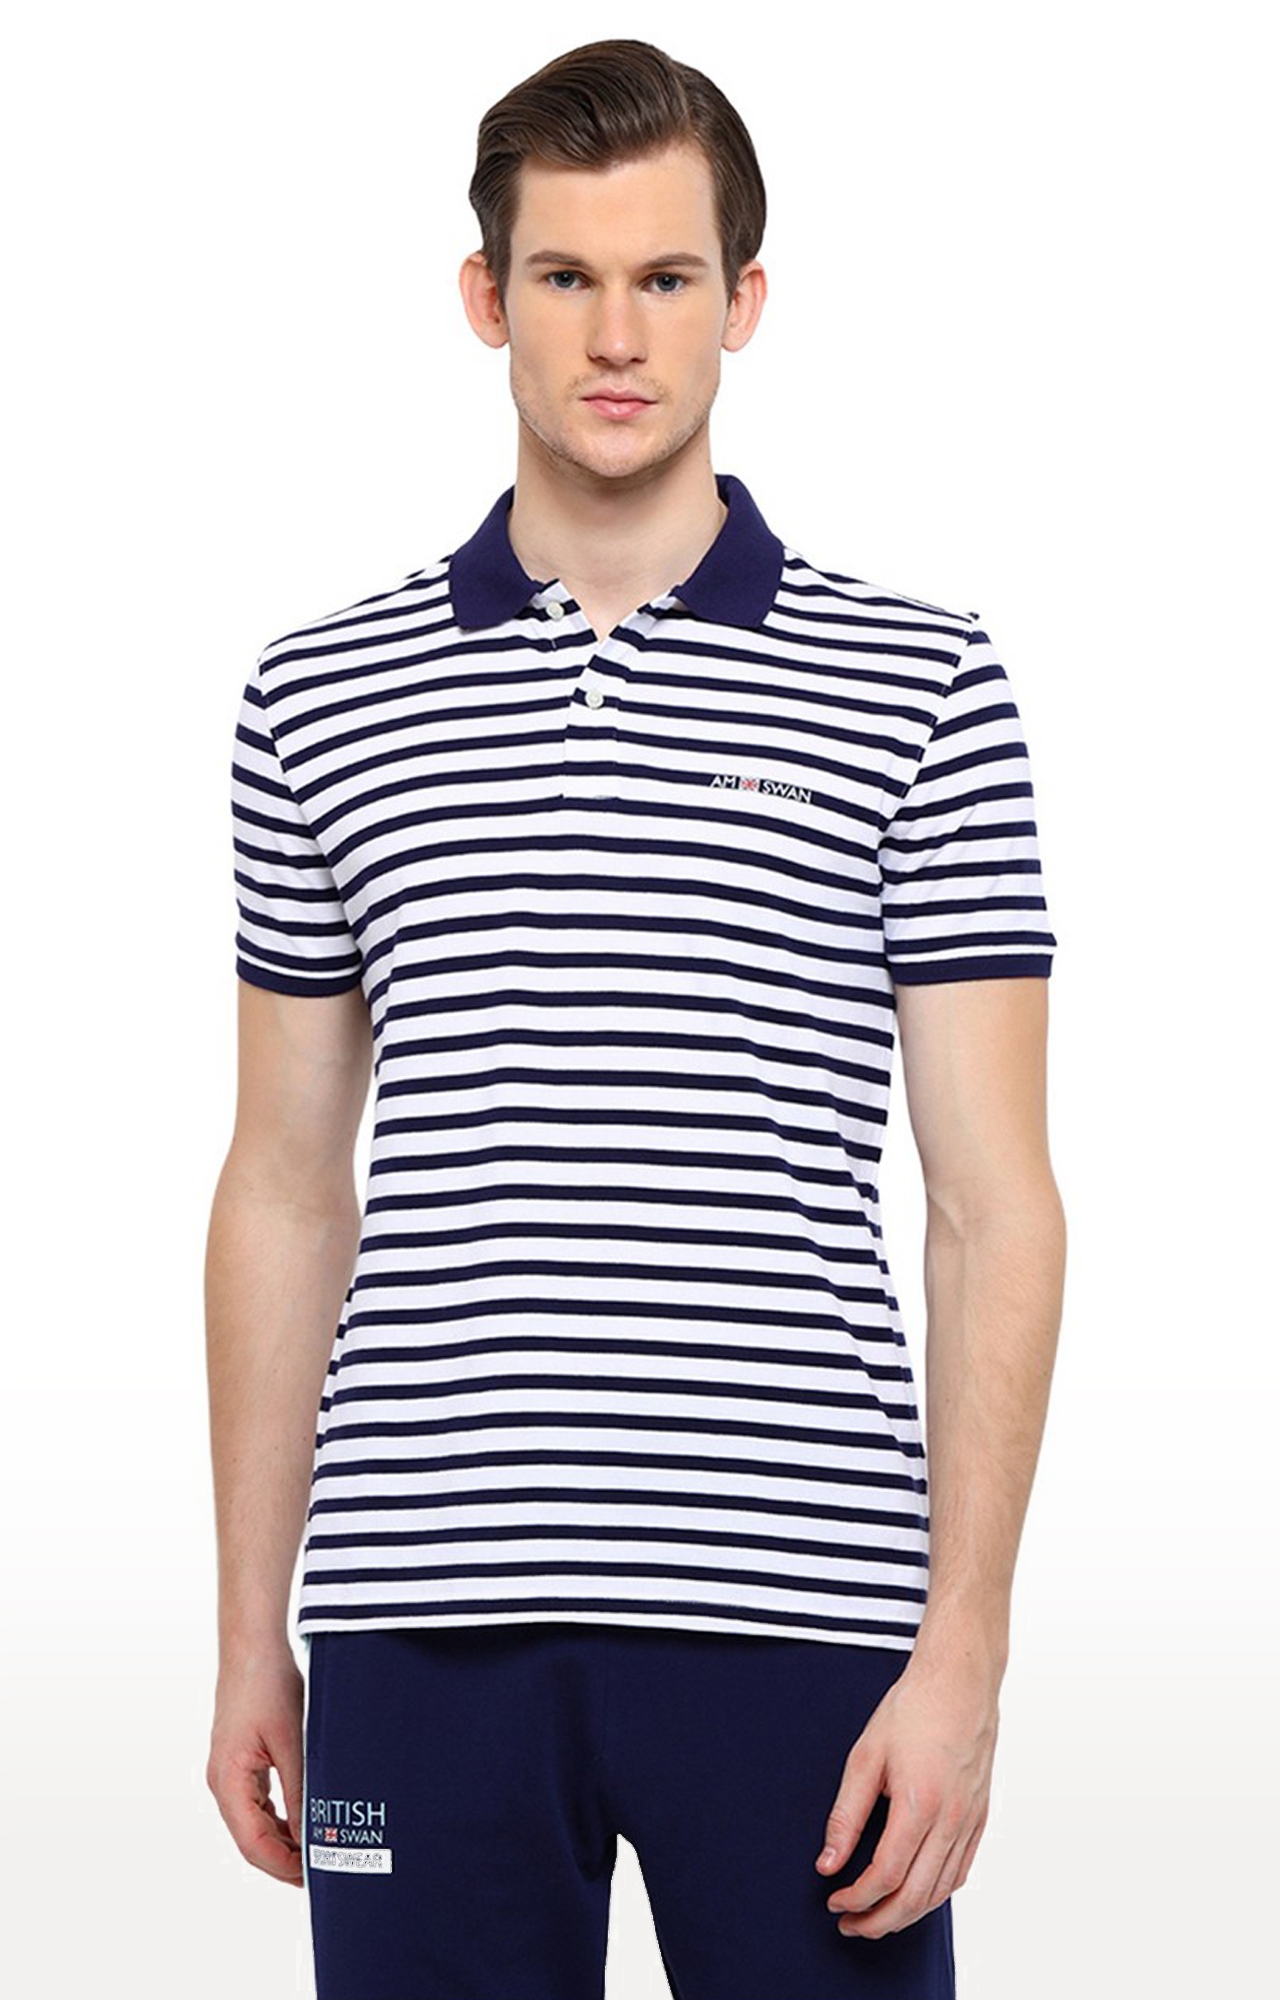 Am Swan | Men's White and Blue Cotton Striped Polo T-Shirt